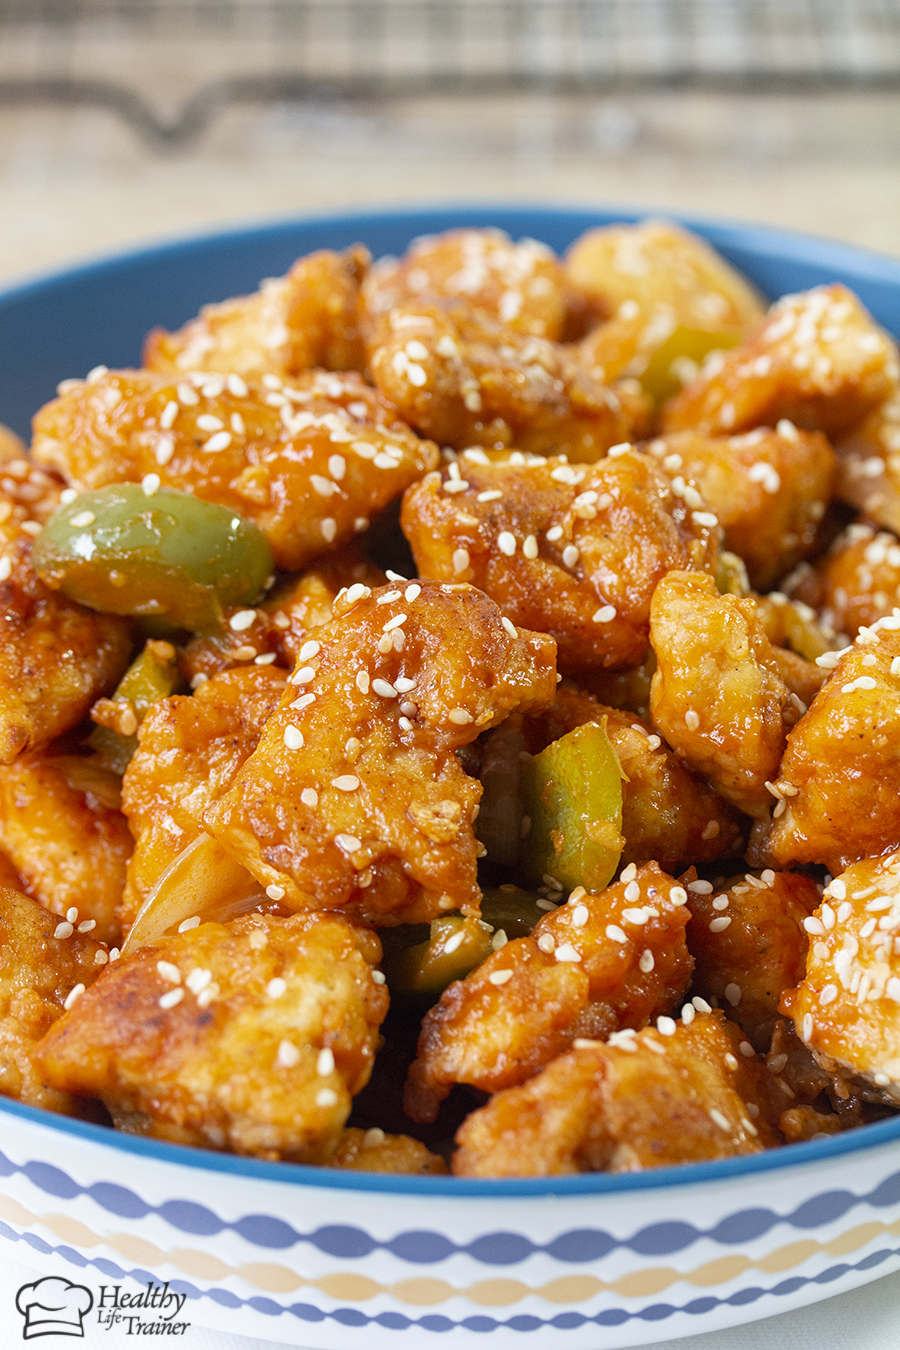 Chinese-style crispy sweet and sour chicken recipe is a crispy light fried chicken simmered in a well-balanced fragranced sticky sauce along with crunchy vegetable chunks.